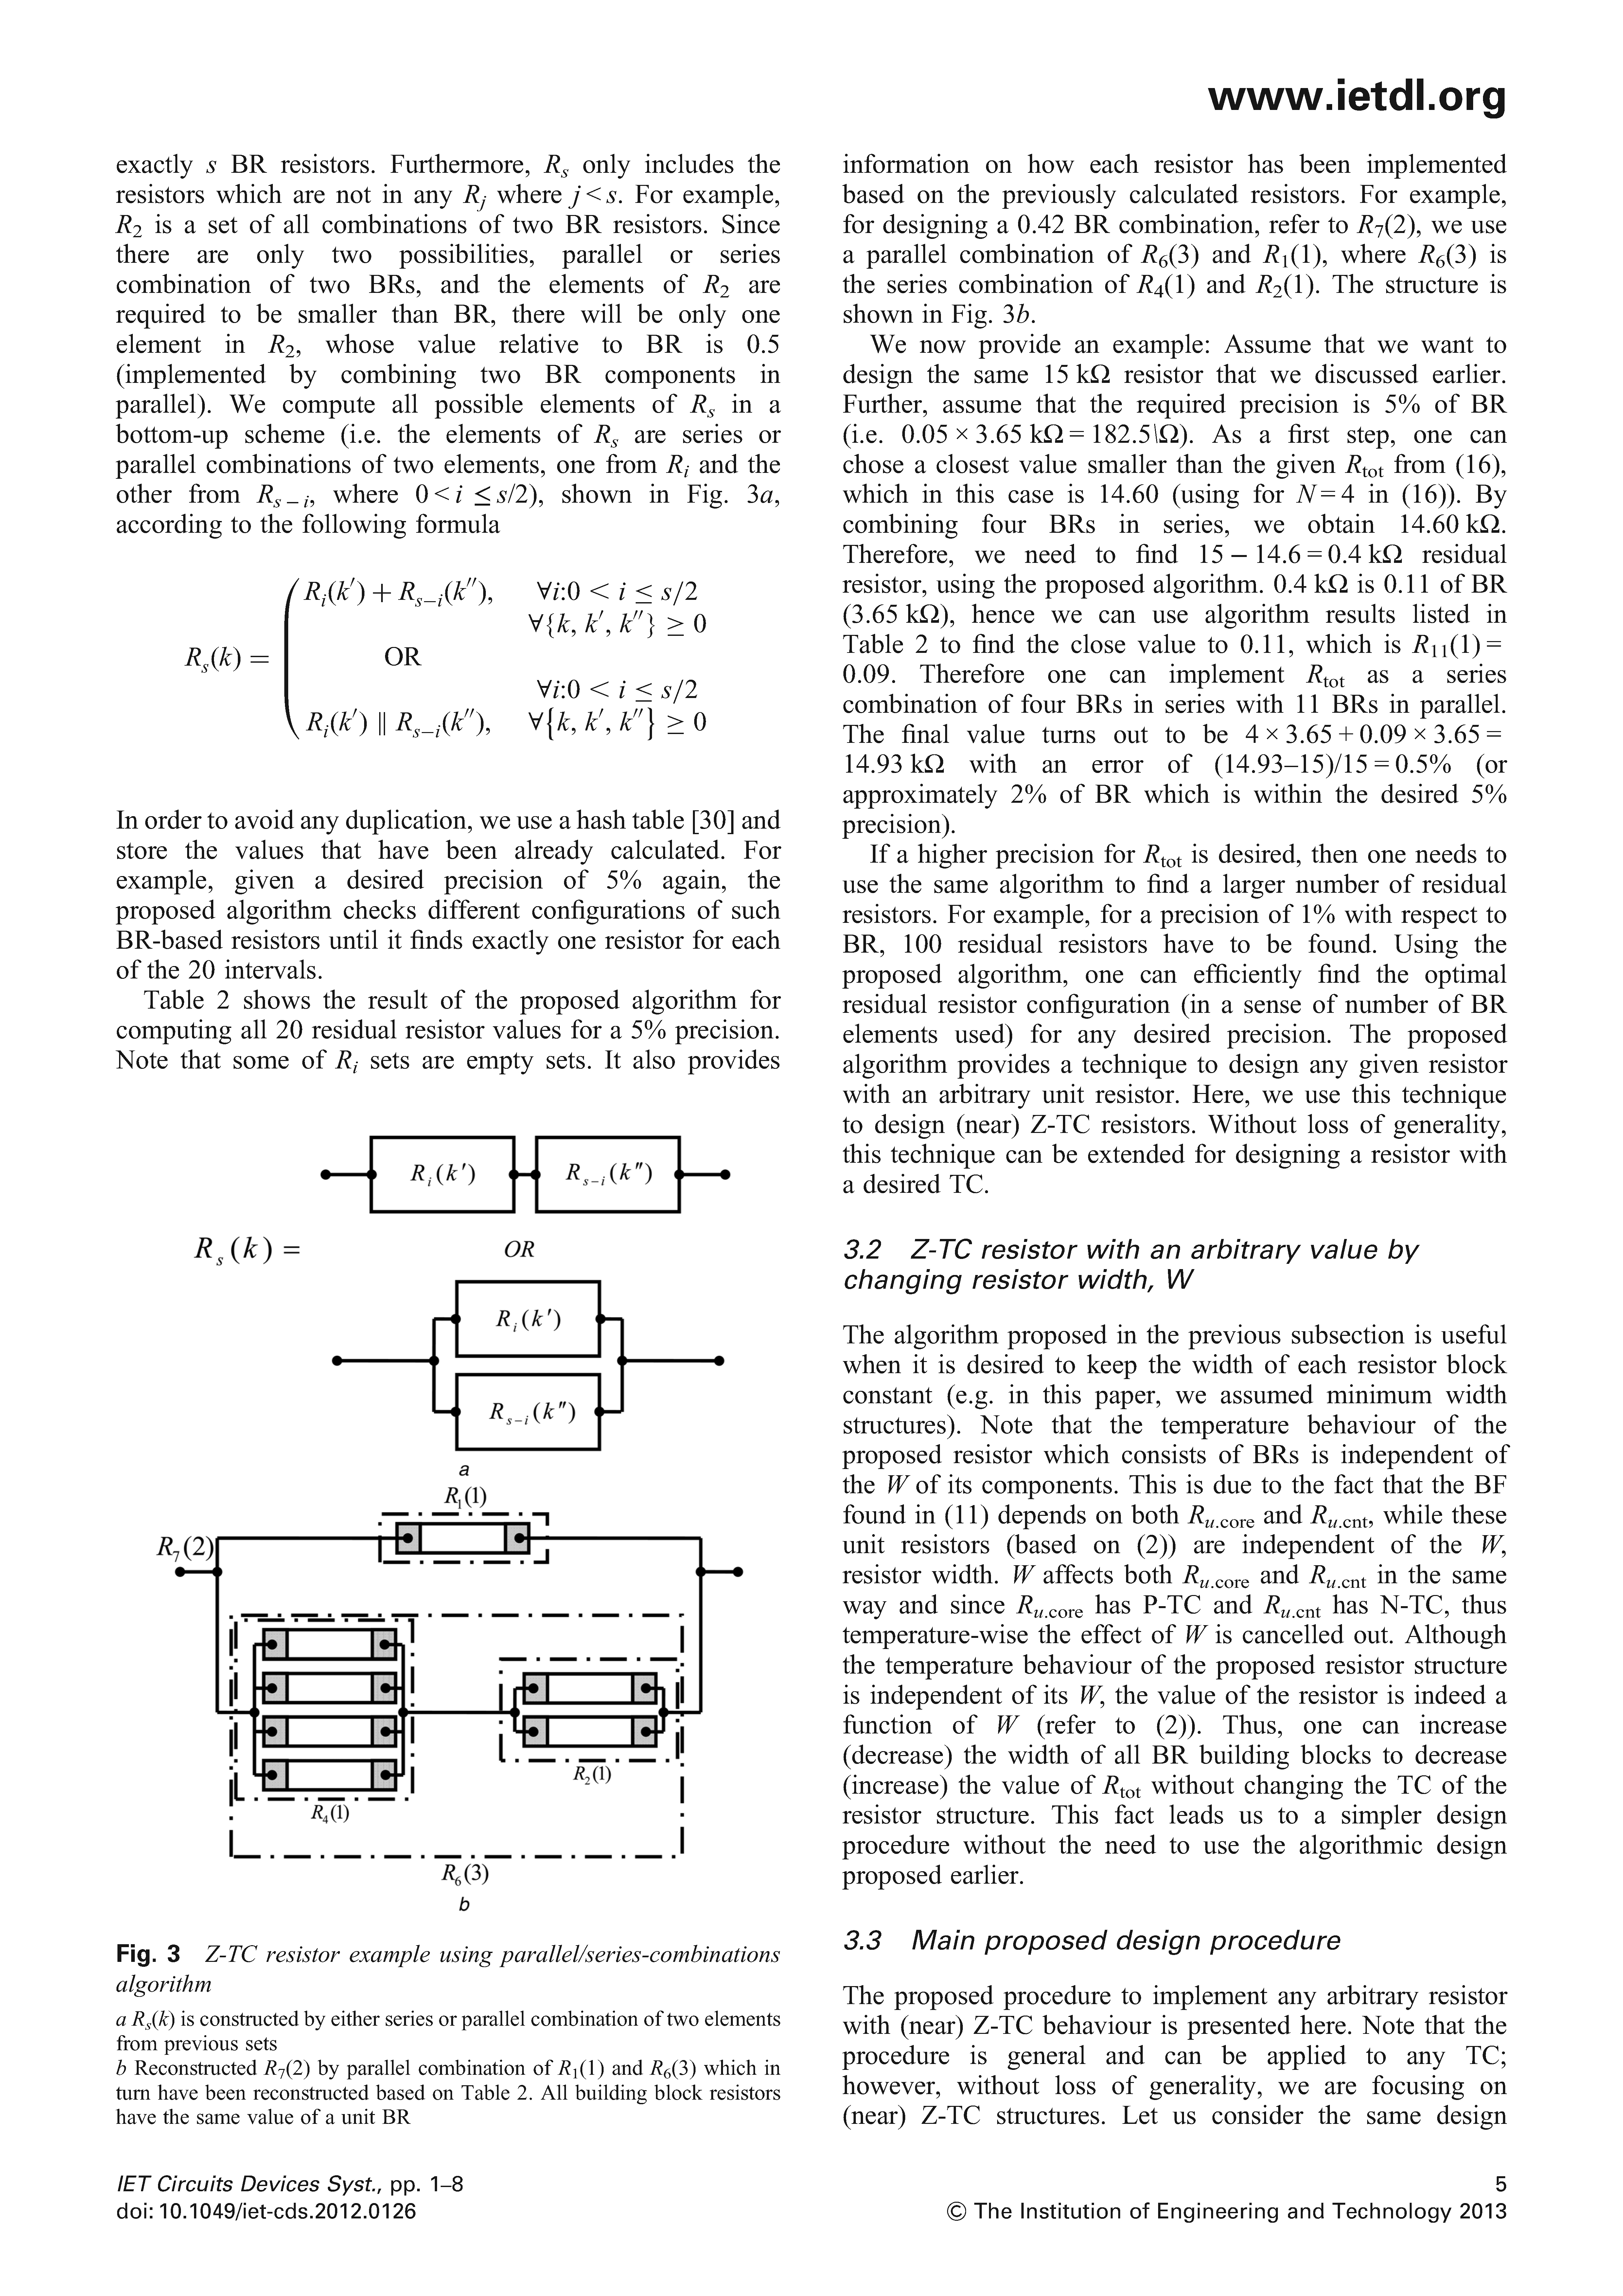 Analysis and Design of Monolithic Resistors with a Desired Temperature Coefficient Using Contacts Page 5